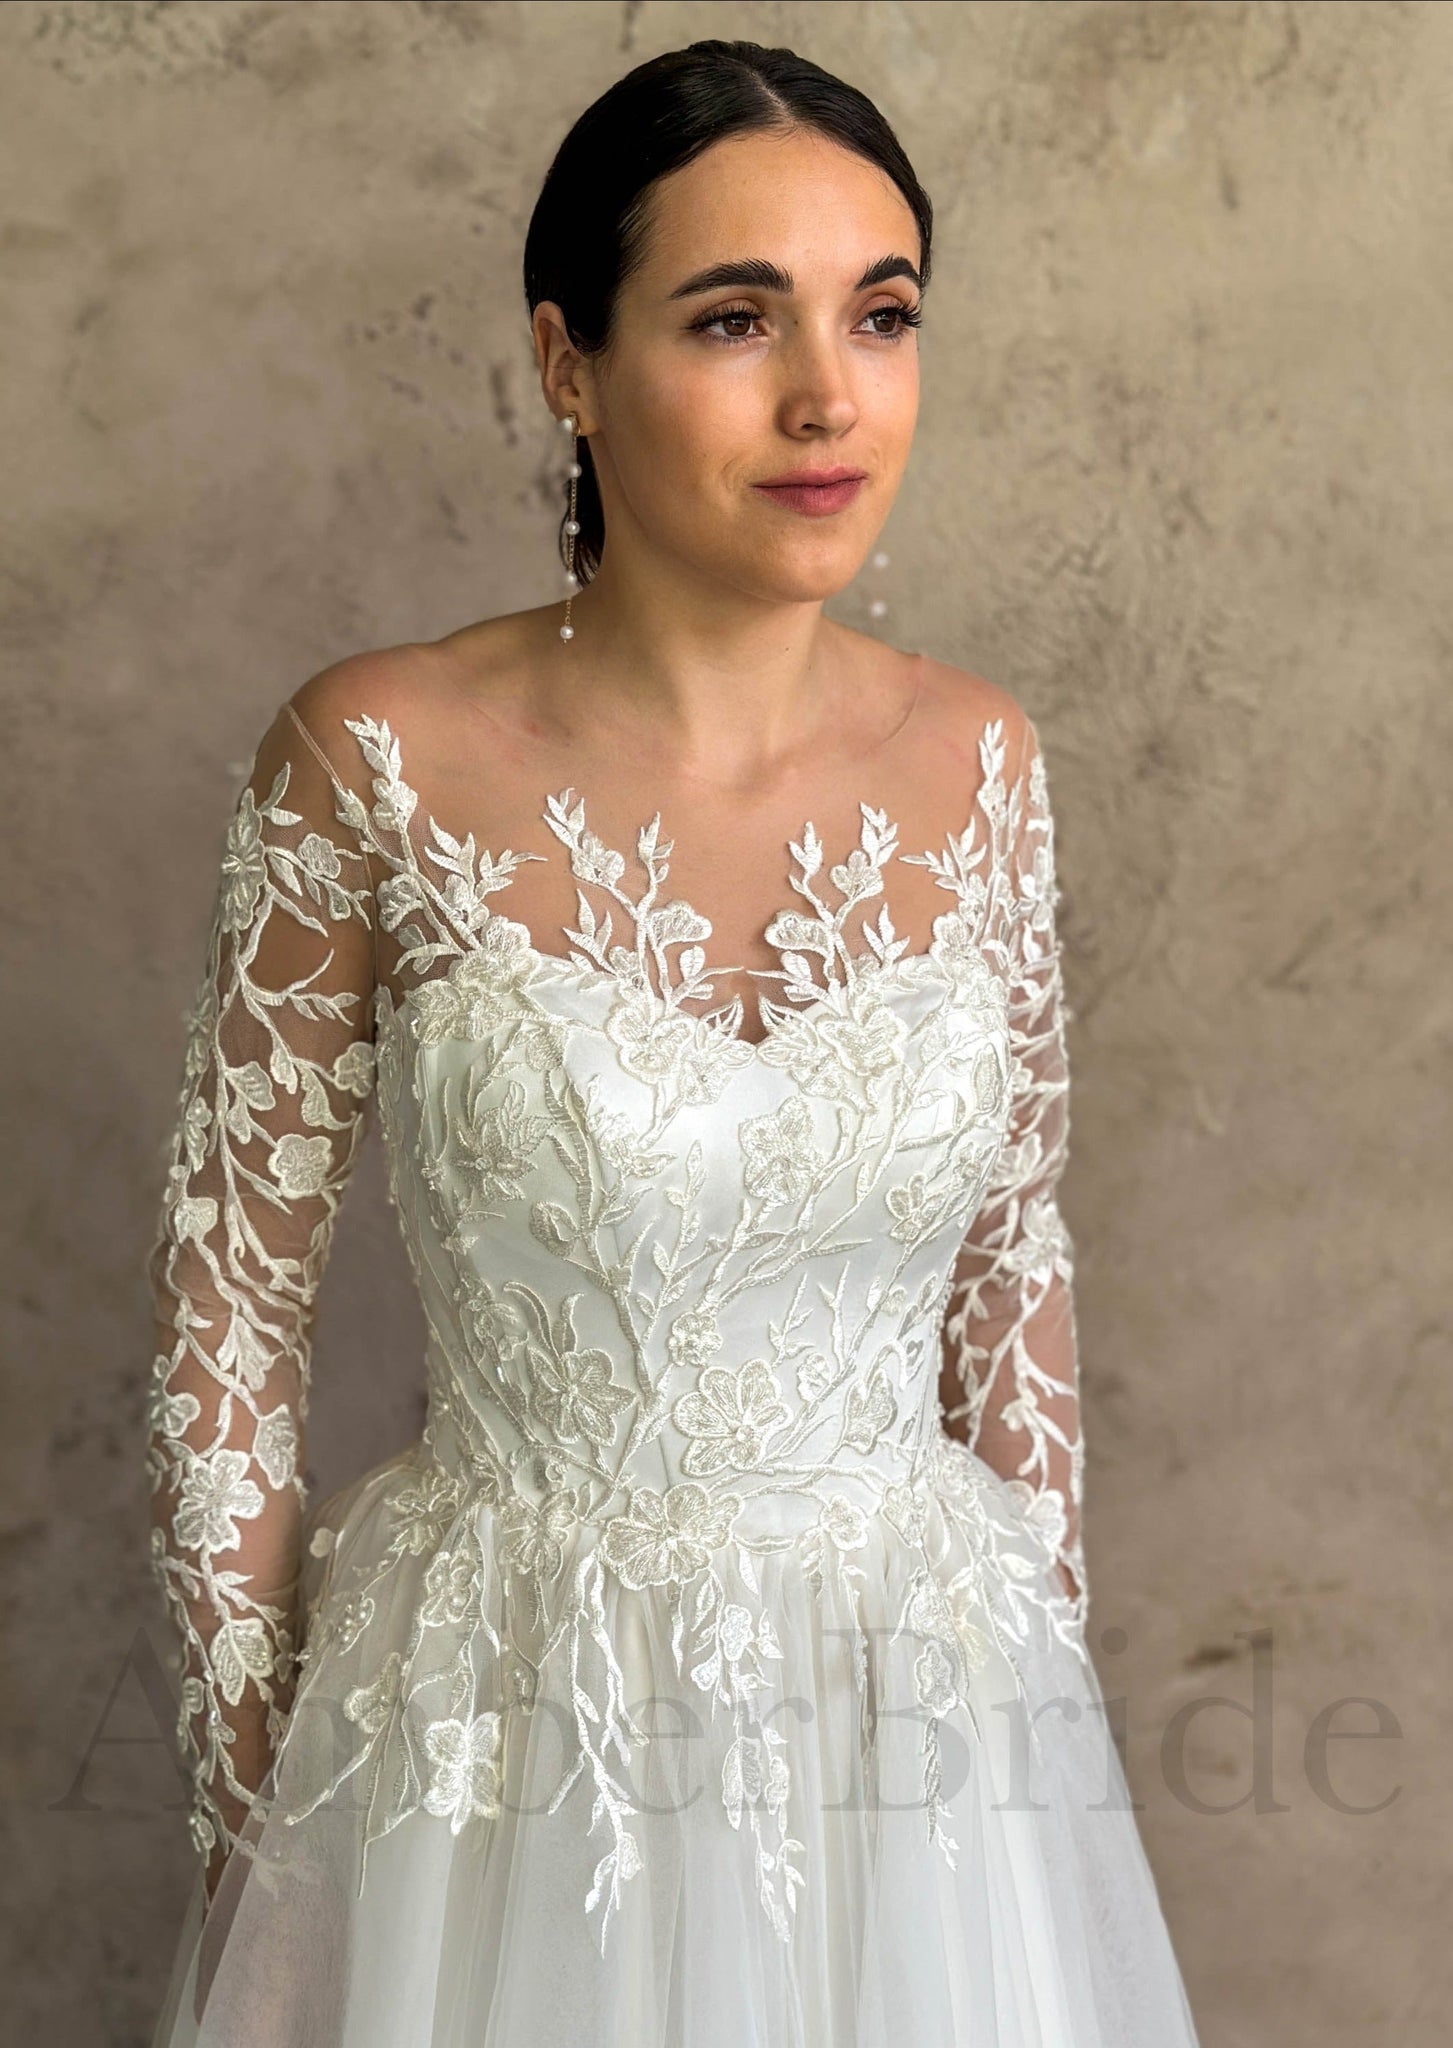 Rustic A-Line Wedding Dress with Floral Appliques and Illusion Design